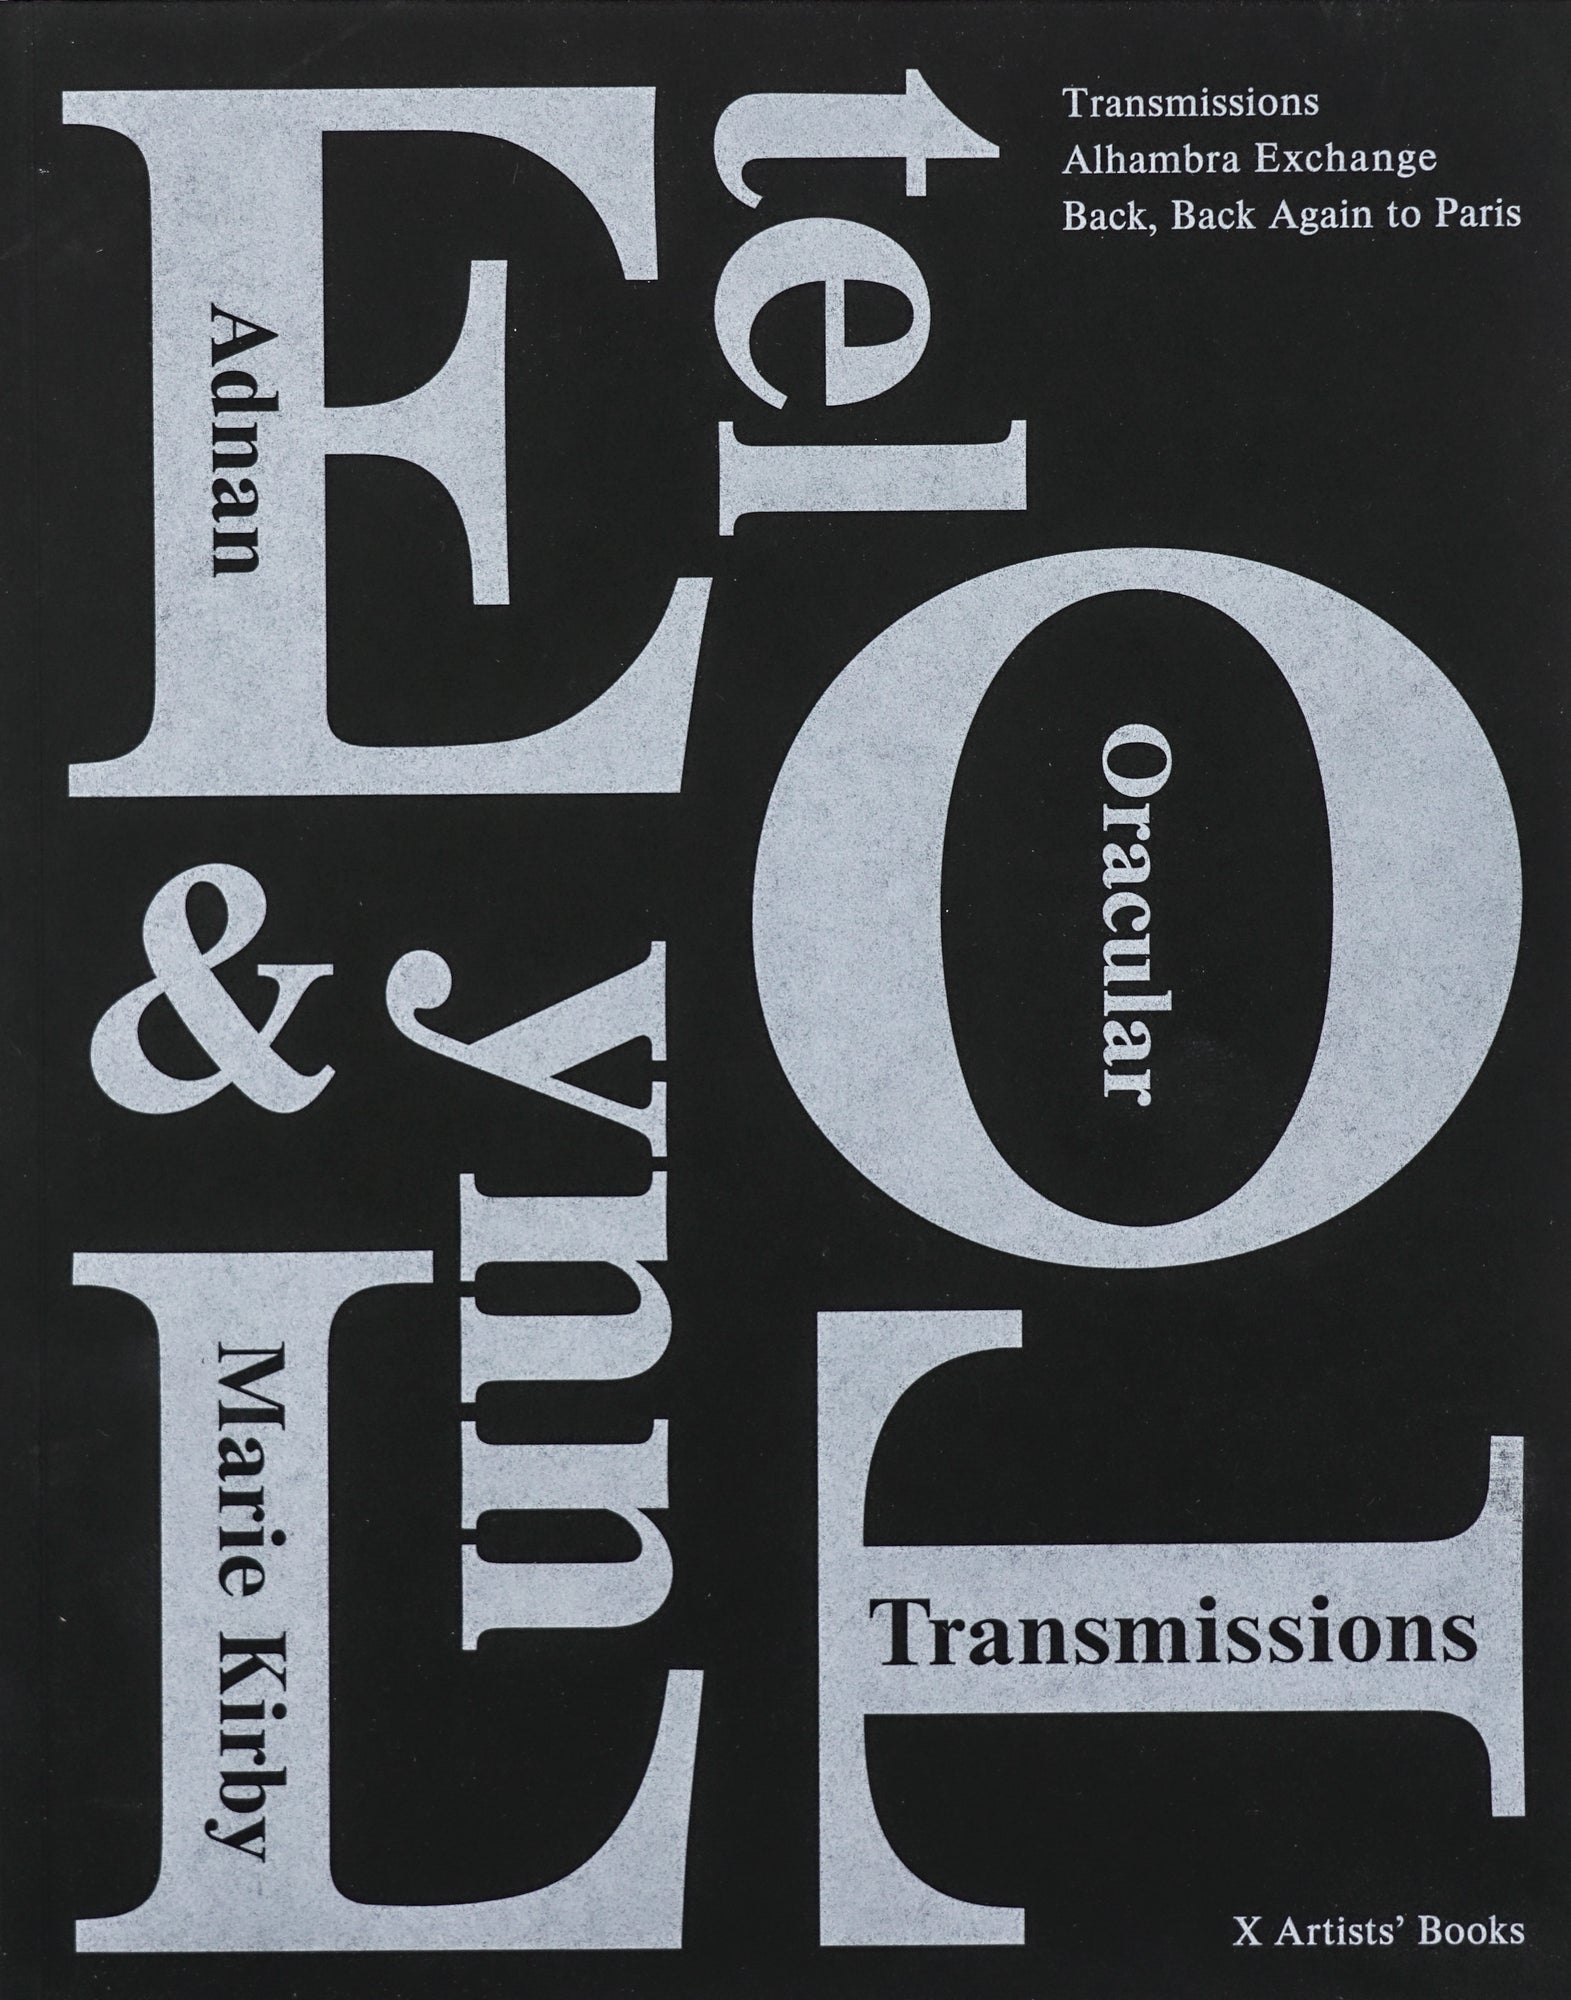 A conglomeration of serif type arrangements in varying sizes makes up the cover of 'Etel & Lynn: Oracular Transmission', light grey on dark grey, almost black. 